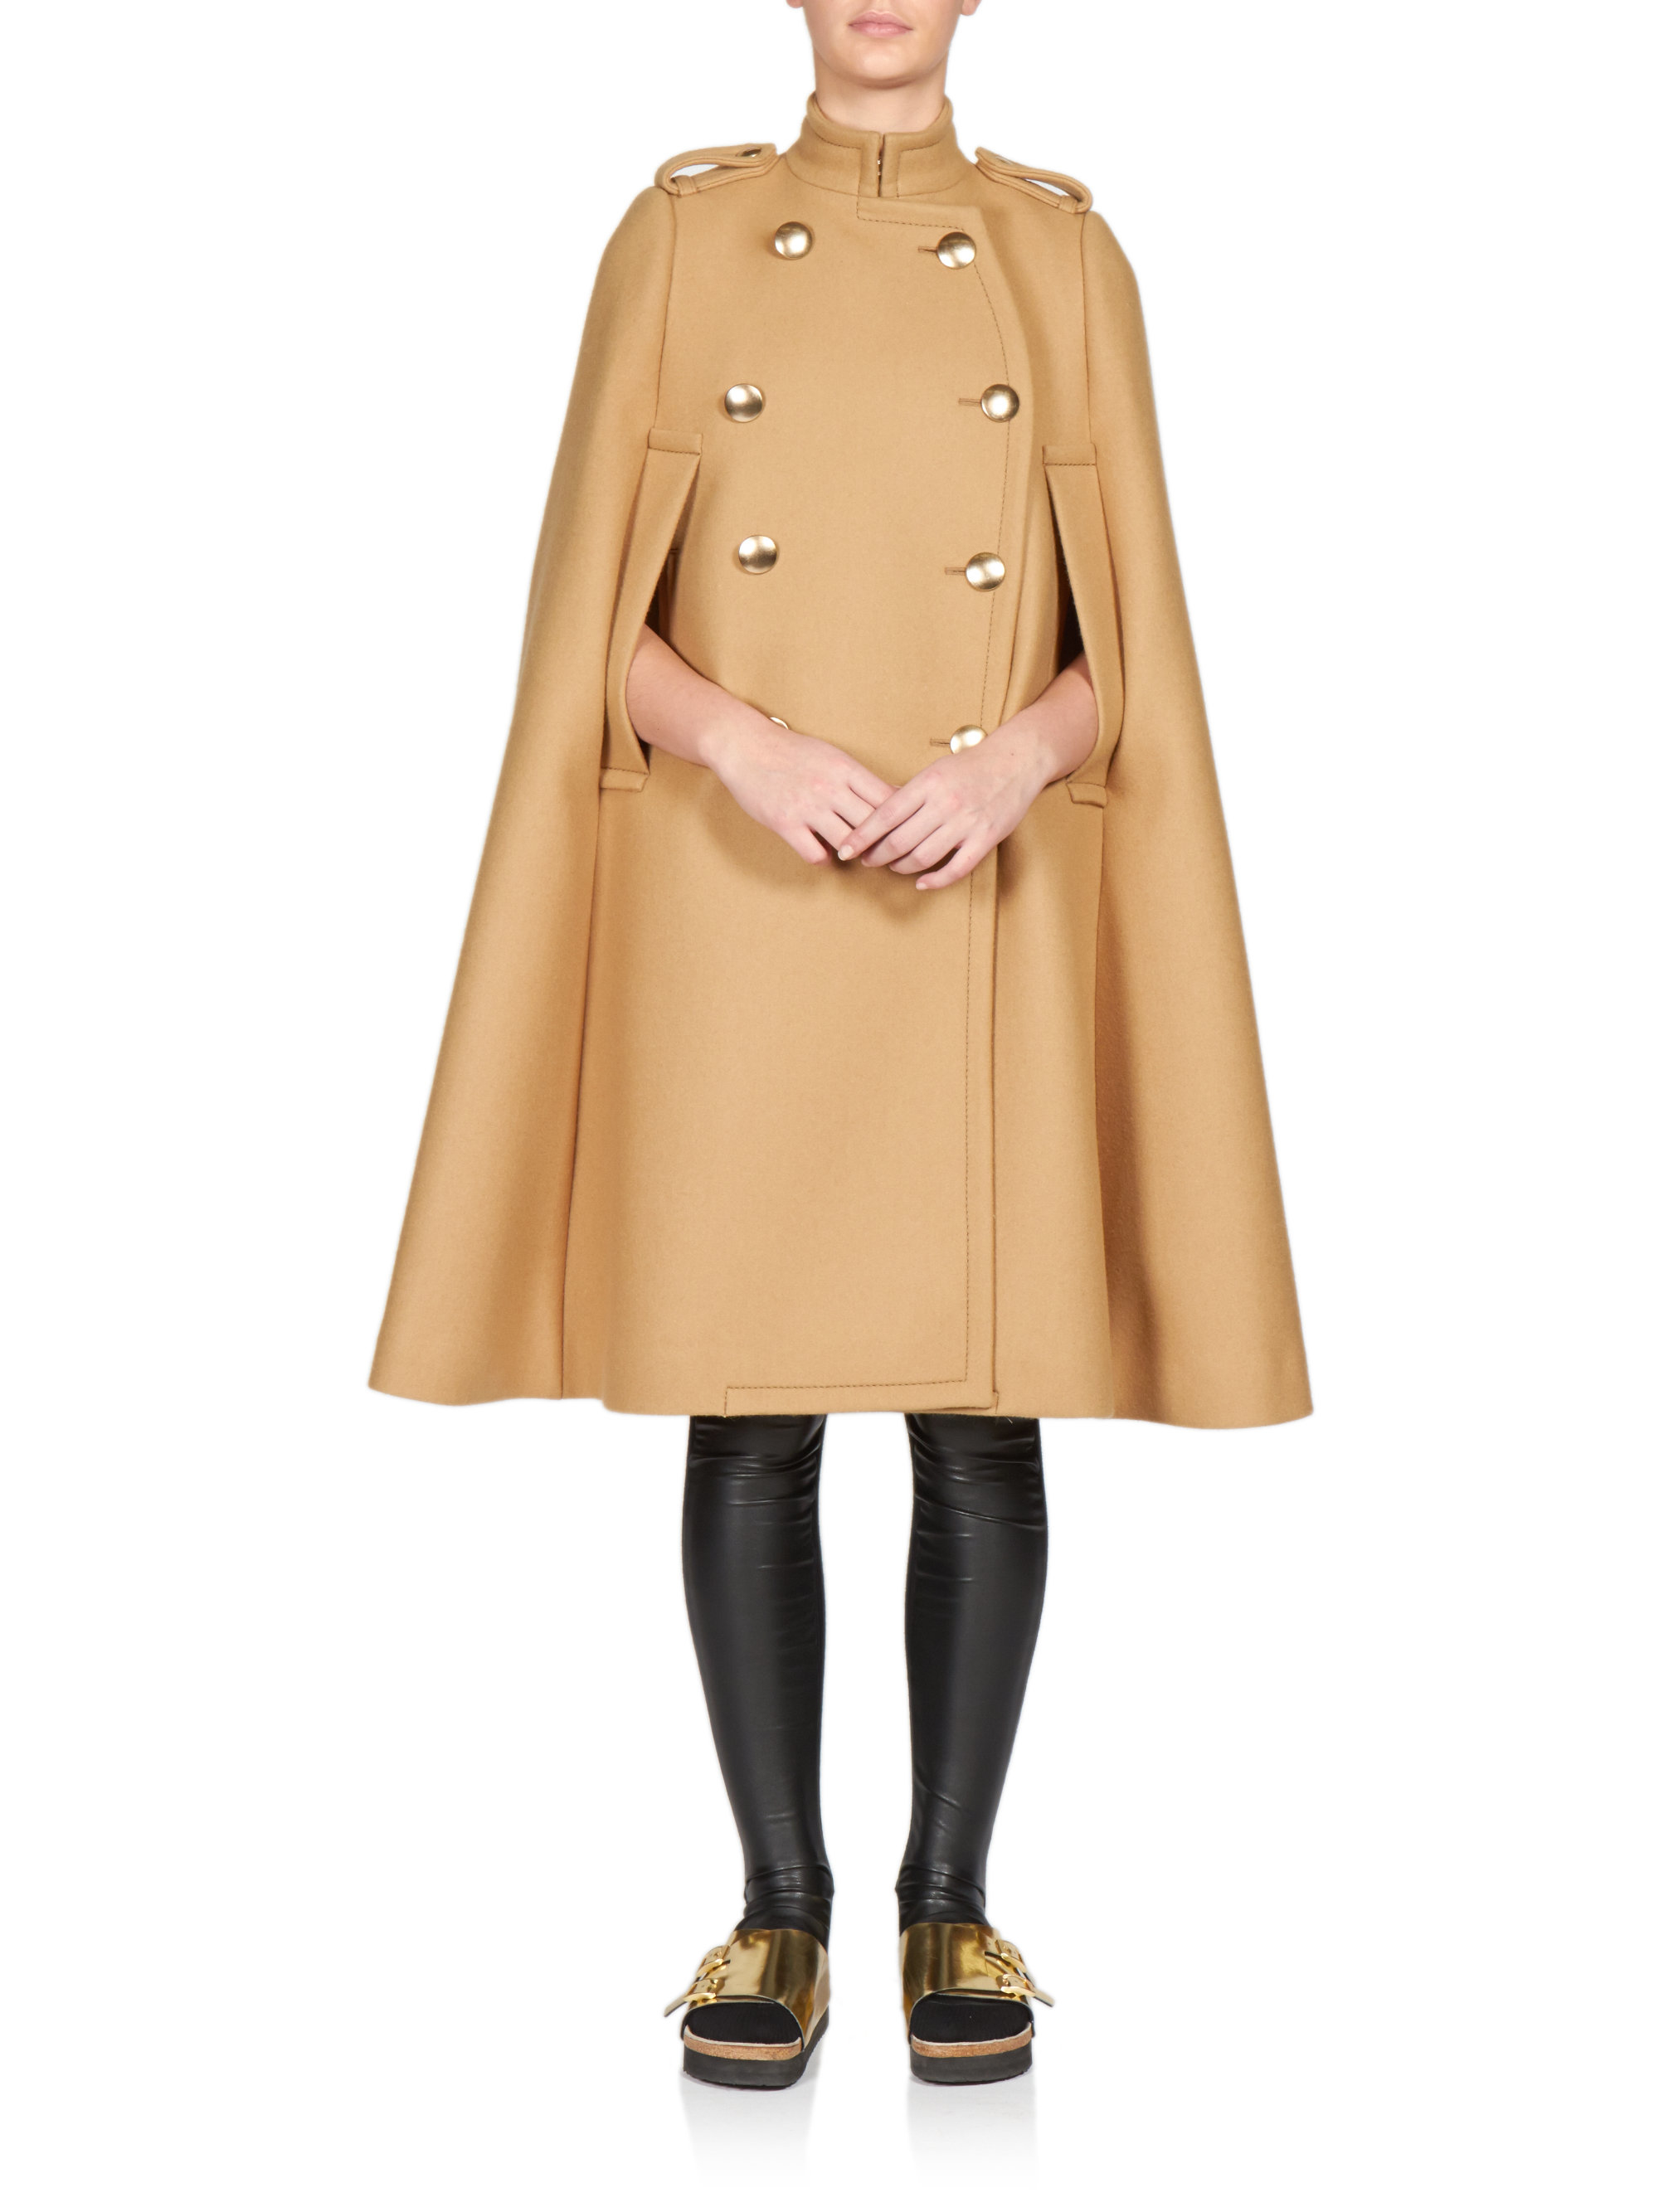 Lyst - Sacai Luck Wool Military Cape in Natural